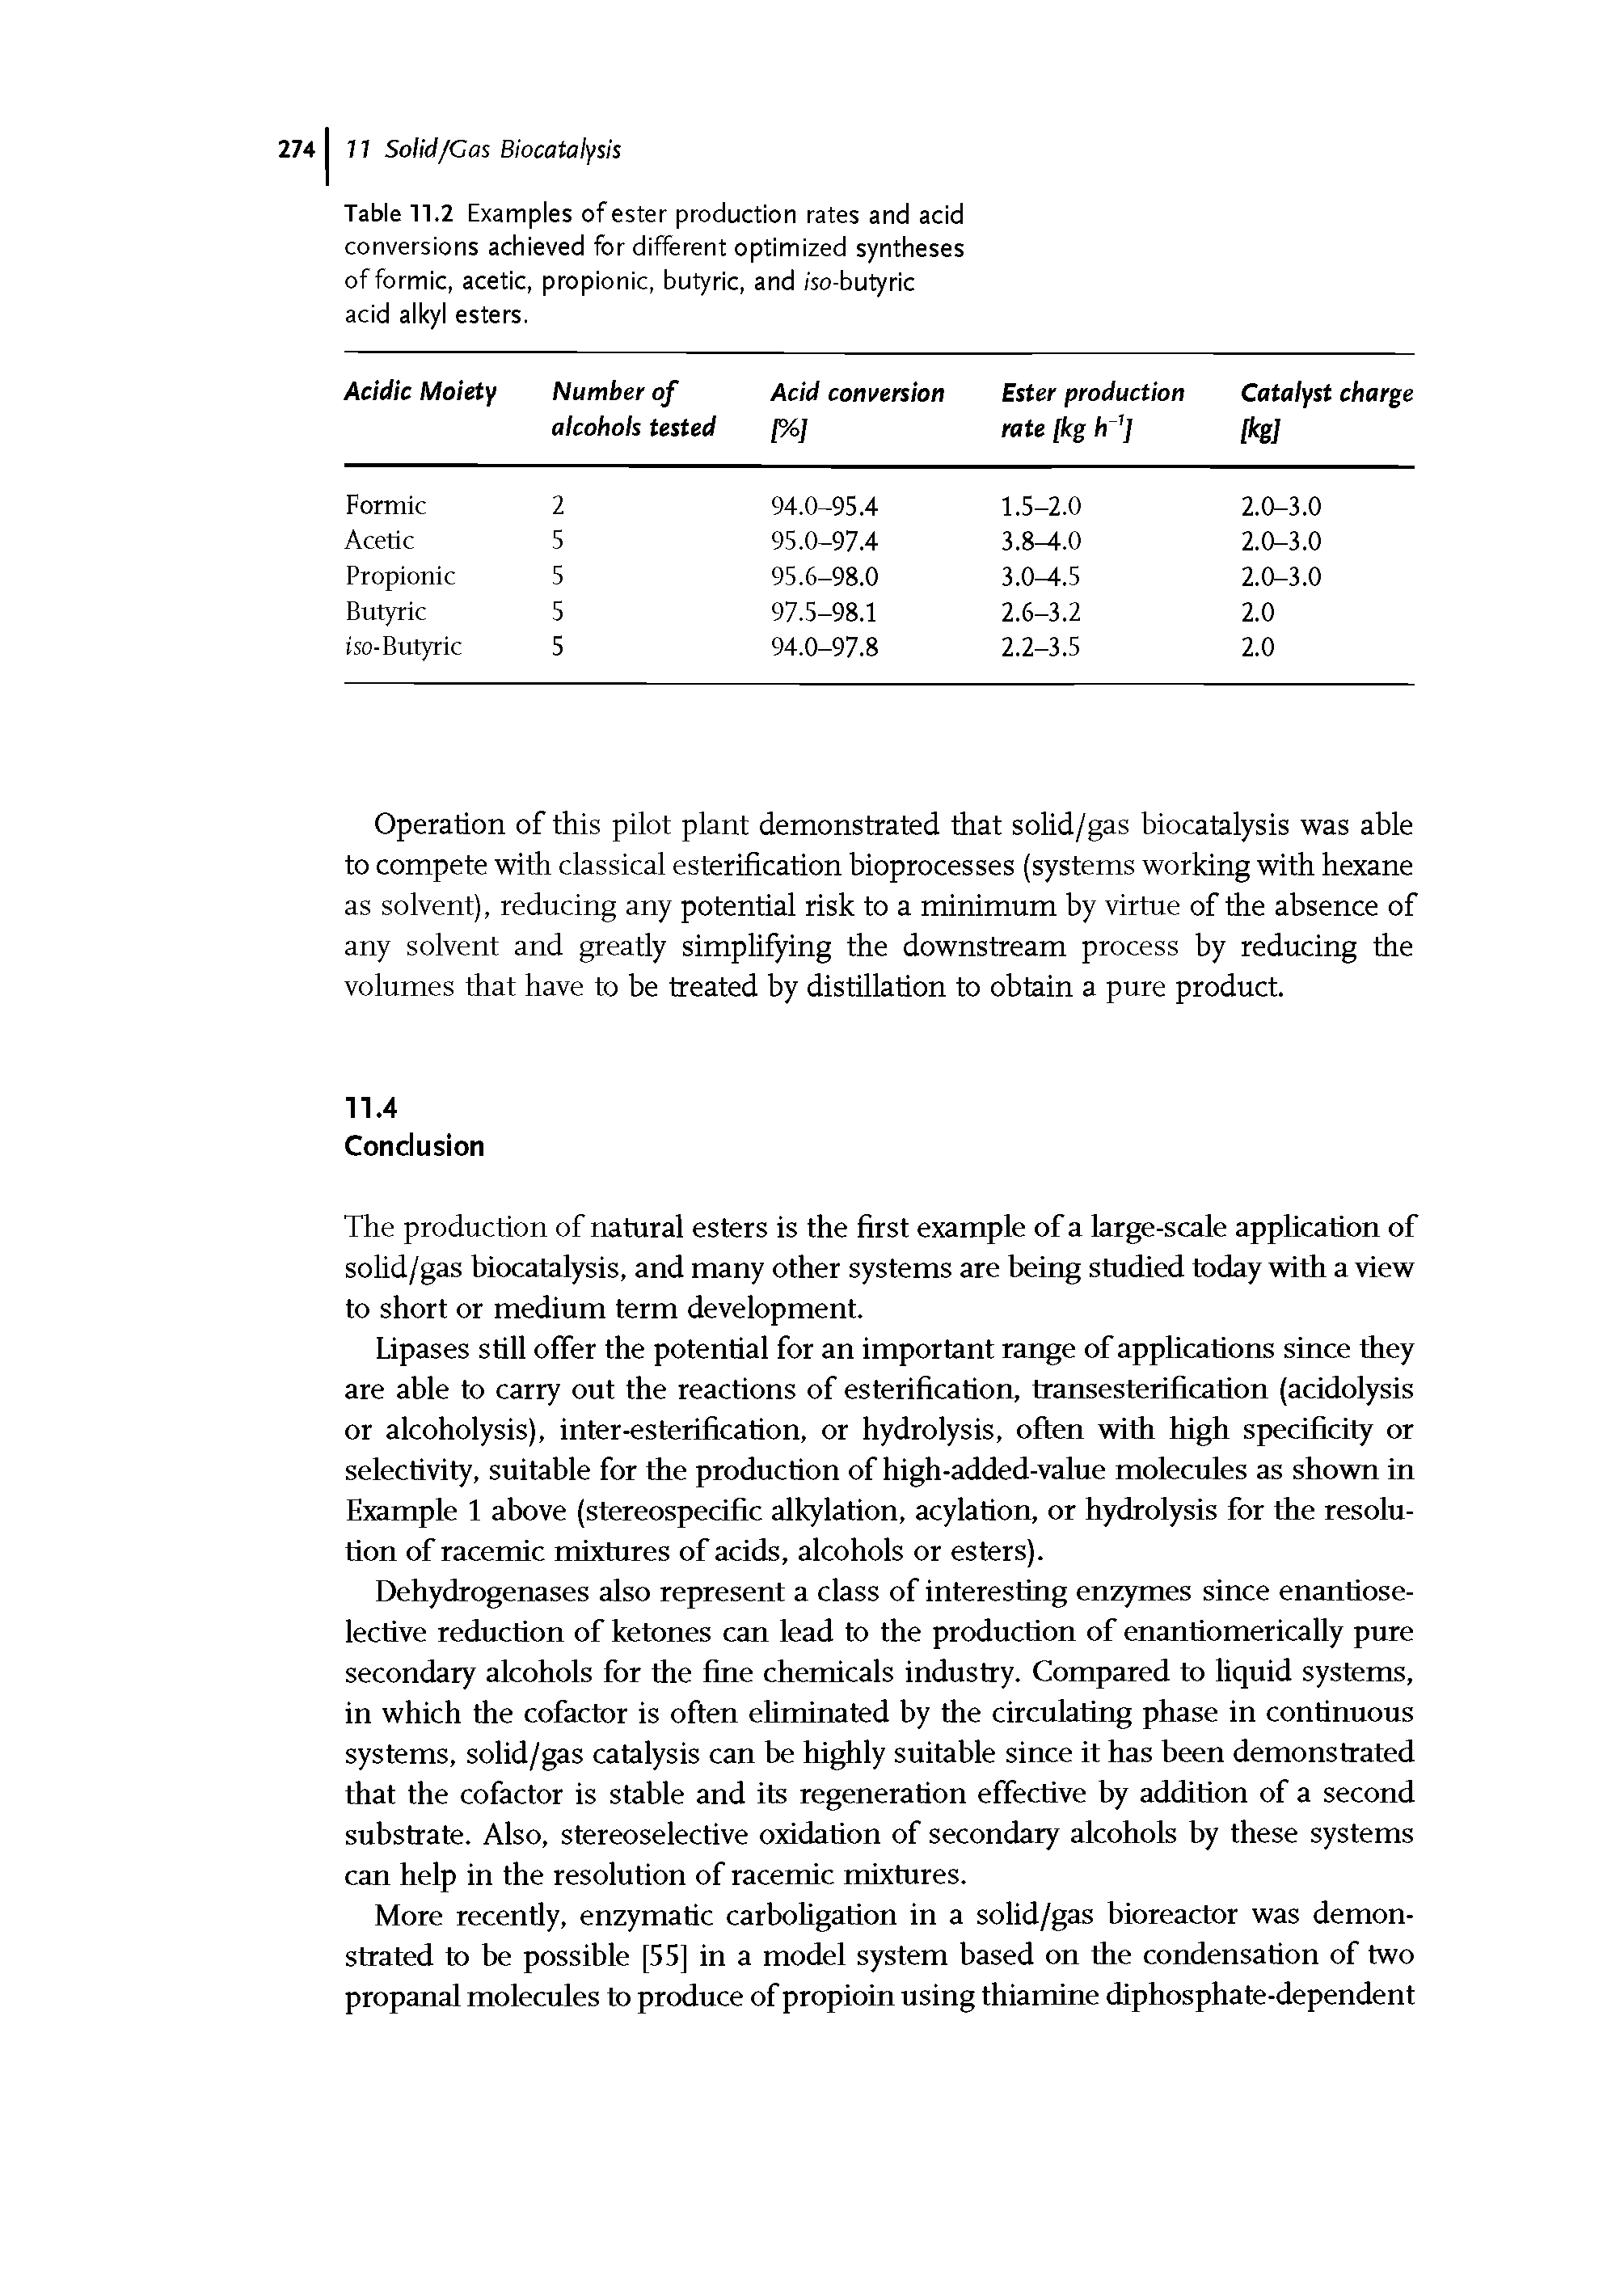 Table .2 Examples of ester production rates and acid conversions achieved for different optimized syntheses of formic, acetic, propionic, butyric, and iso-butyric acid alkyl esters.